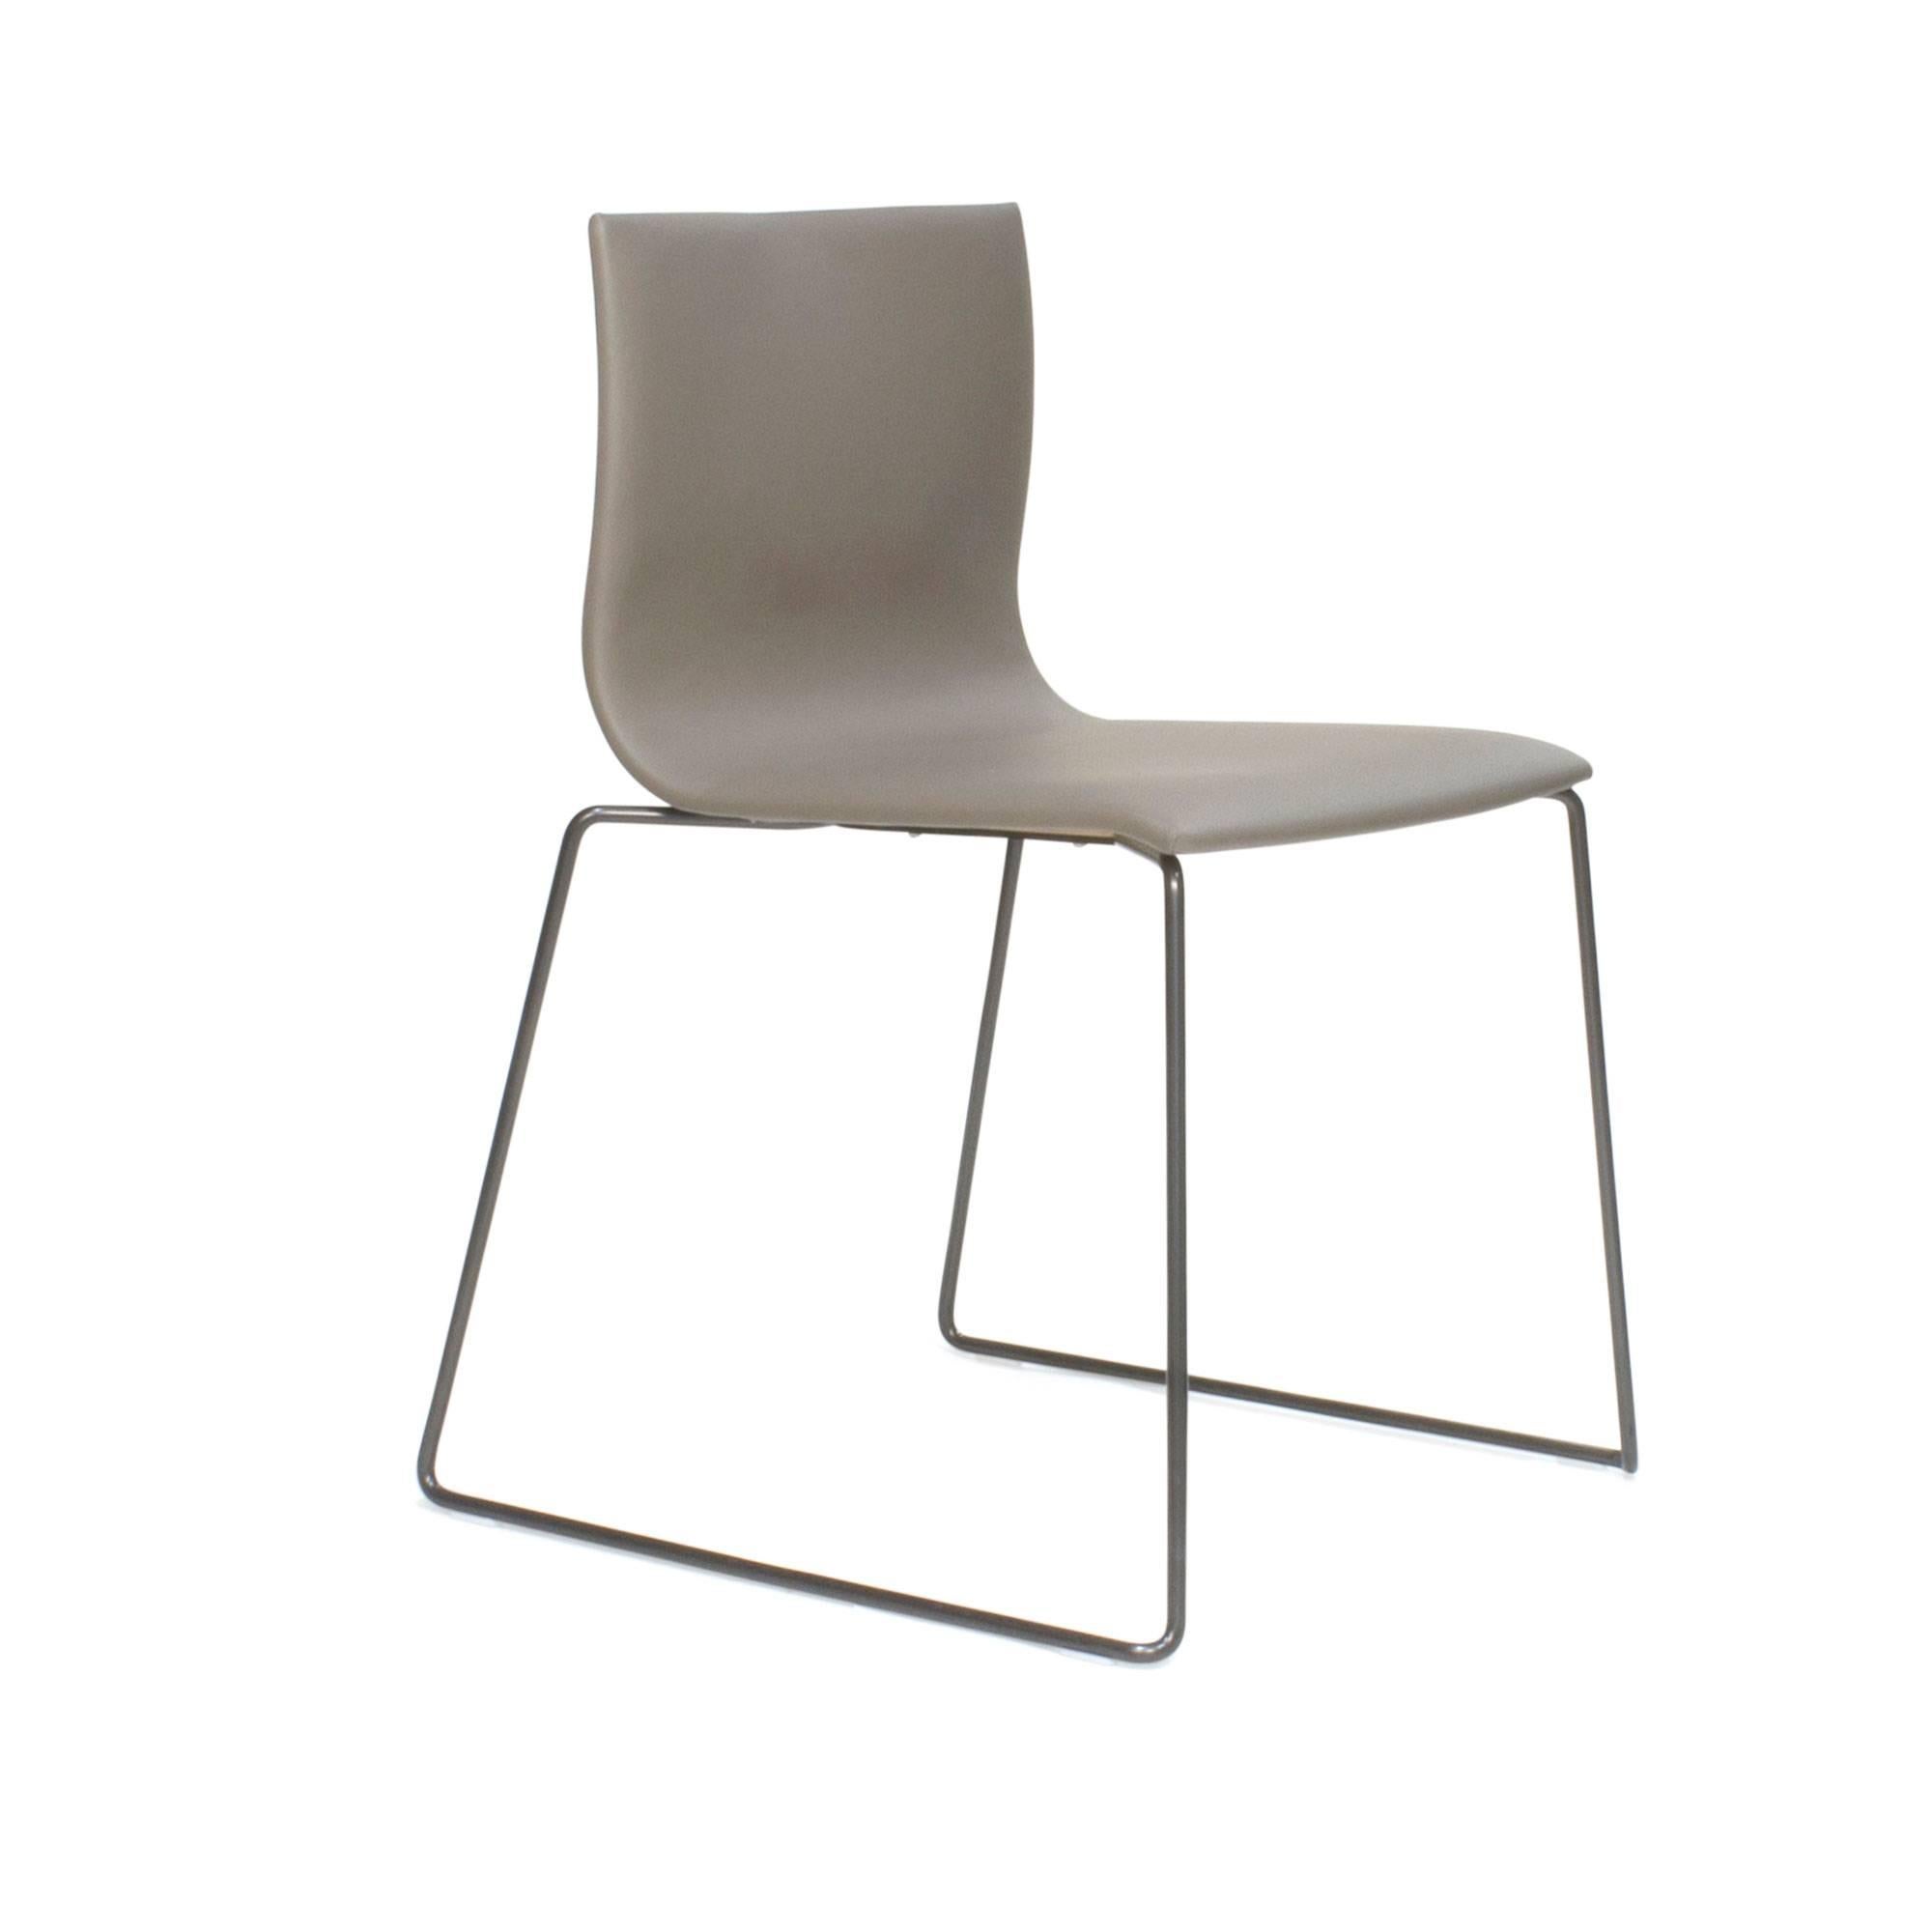 The blow dining chair features a formal design, resulting from a combination between the chair seat in wood and the metal structure. The result of this combination is a formal design, curvy and soft, which accommodate perfectly modern and elegant